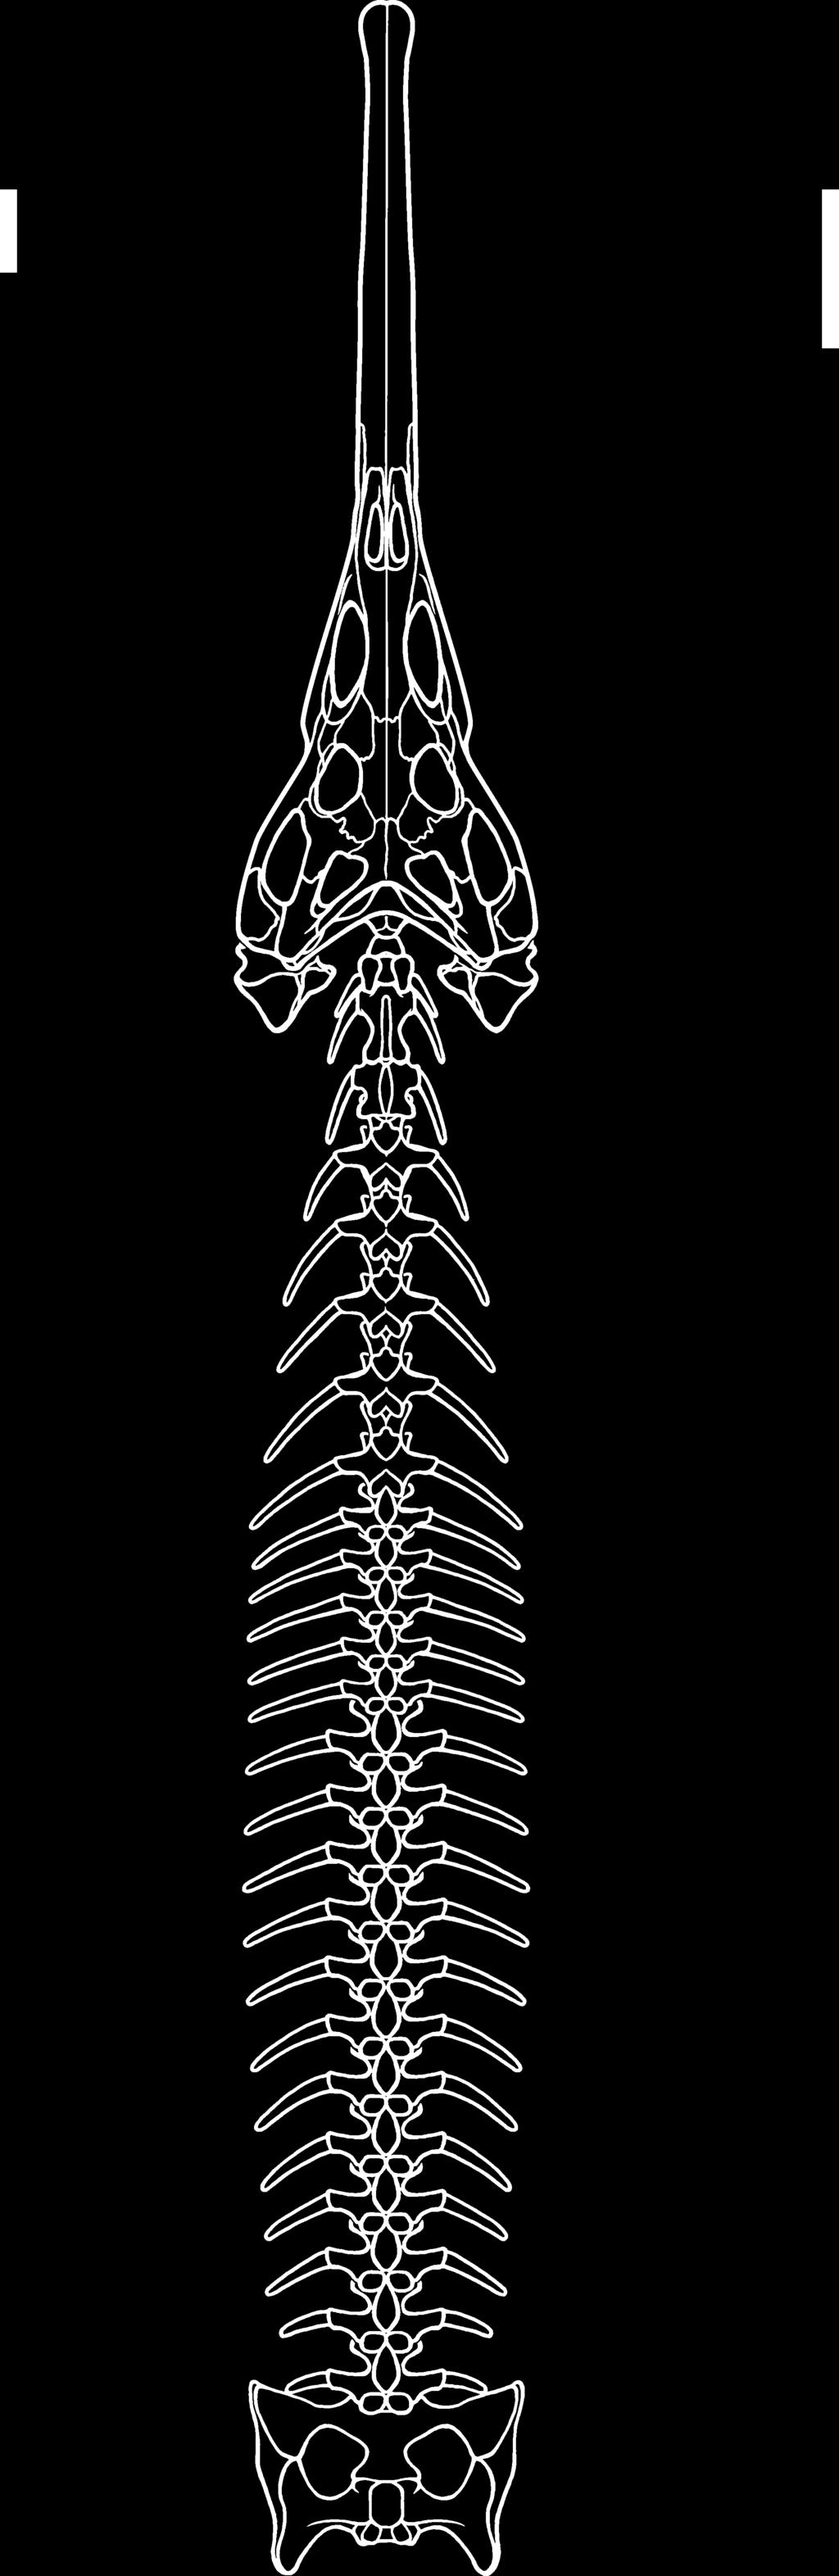 184 PALAEONTOLOGY, VOLUME 53 Parasuchia (Phytosauria) A B When the manual and pedal skeletal outlines of the reconstruction of Parasuchus hislopi (Chatterjee 1978) are scaled optimally, the fit to